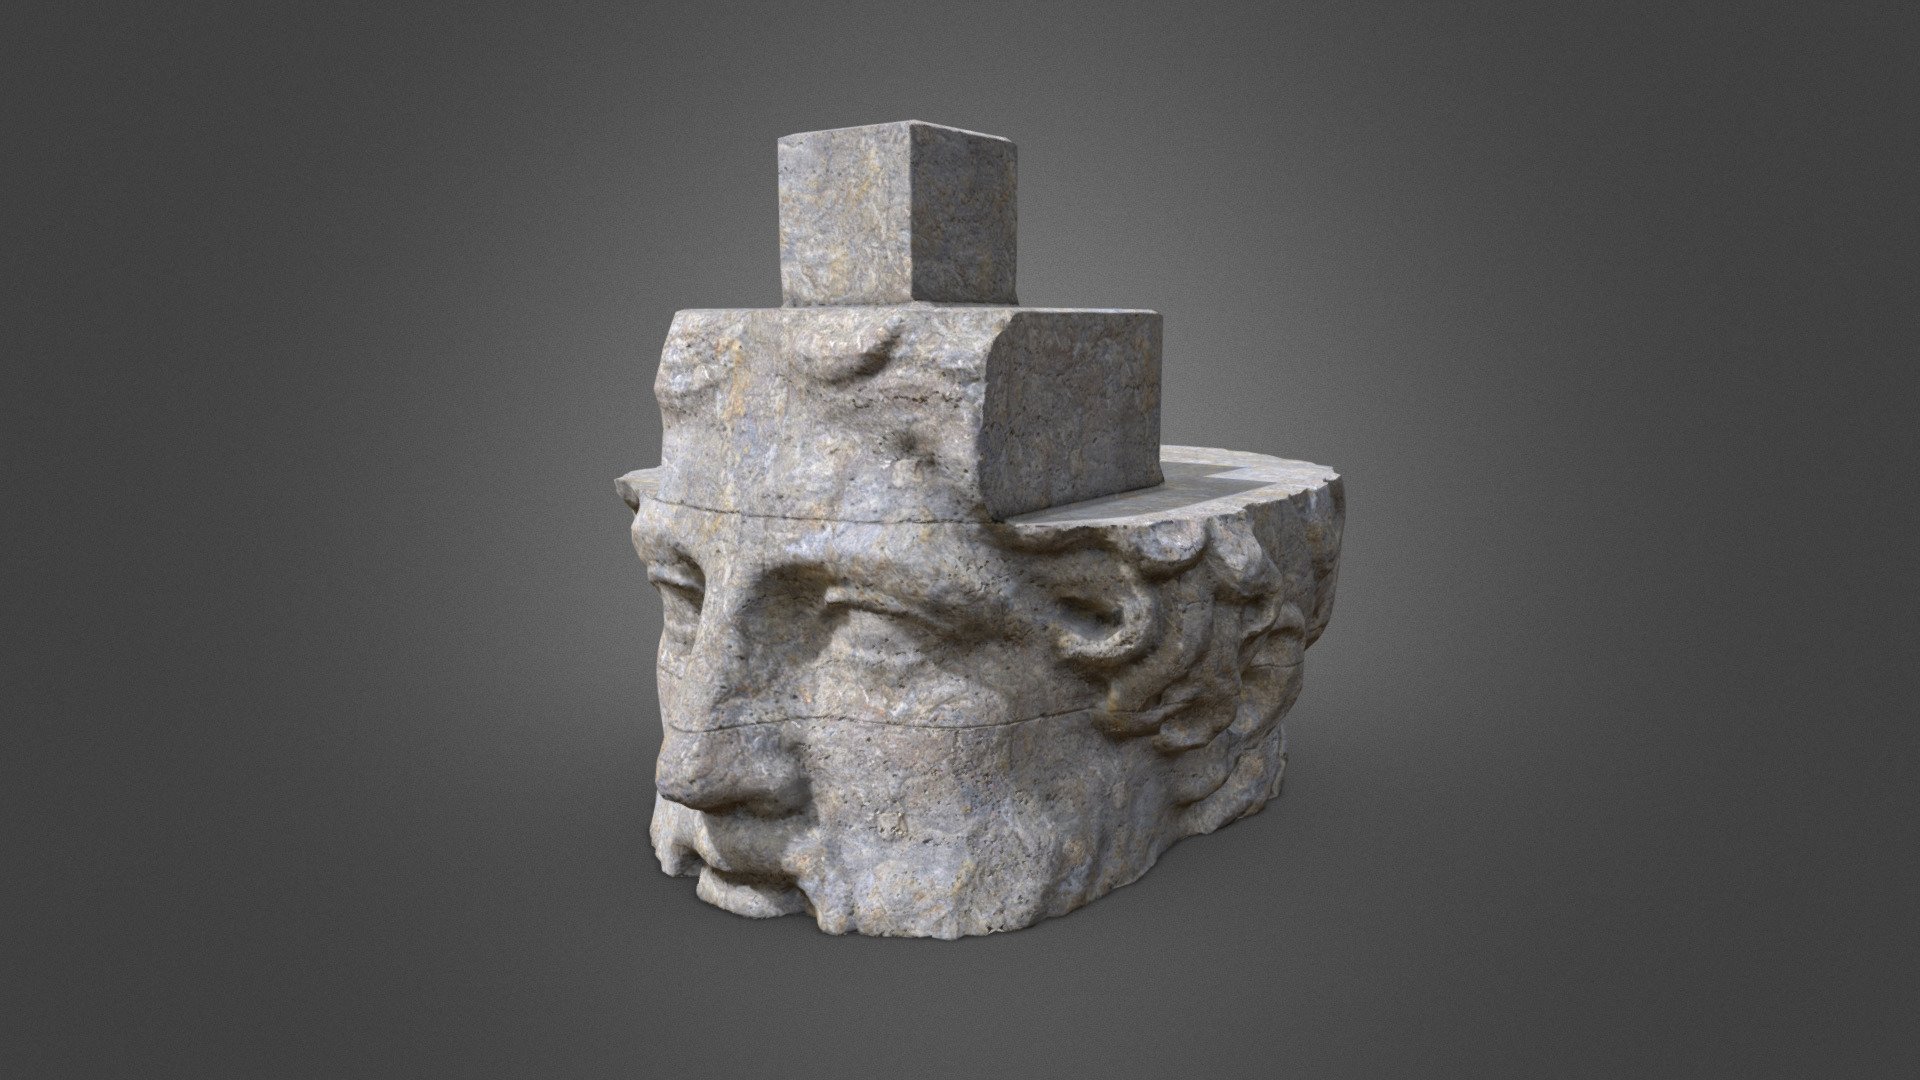 a statue head of ancient god herm made of stone blocks. under construction.

Asset for environment setup - Statue Under Construction - environment asset - Download Free 3D model by Samuel Francis Johnson (Oneironauticus) (@oneironauticus) 3d model